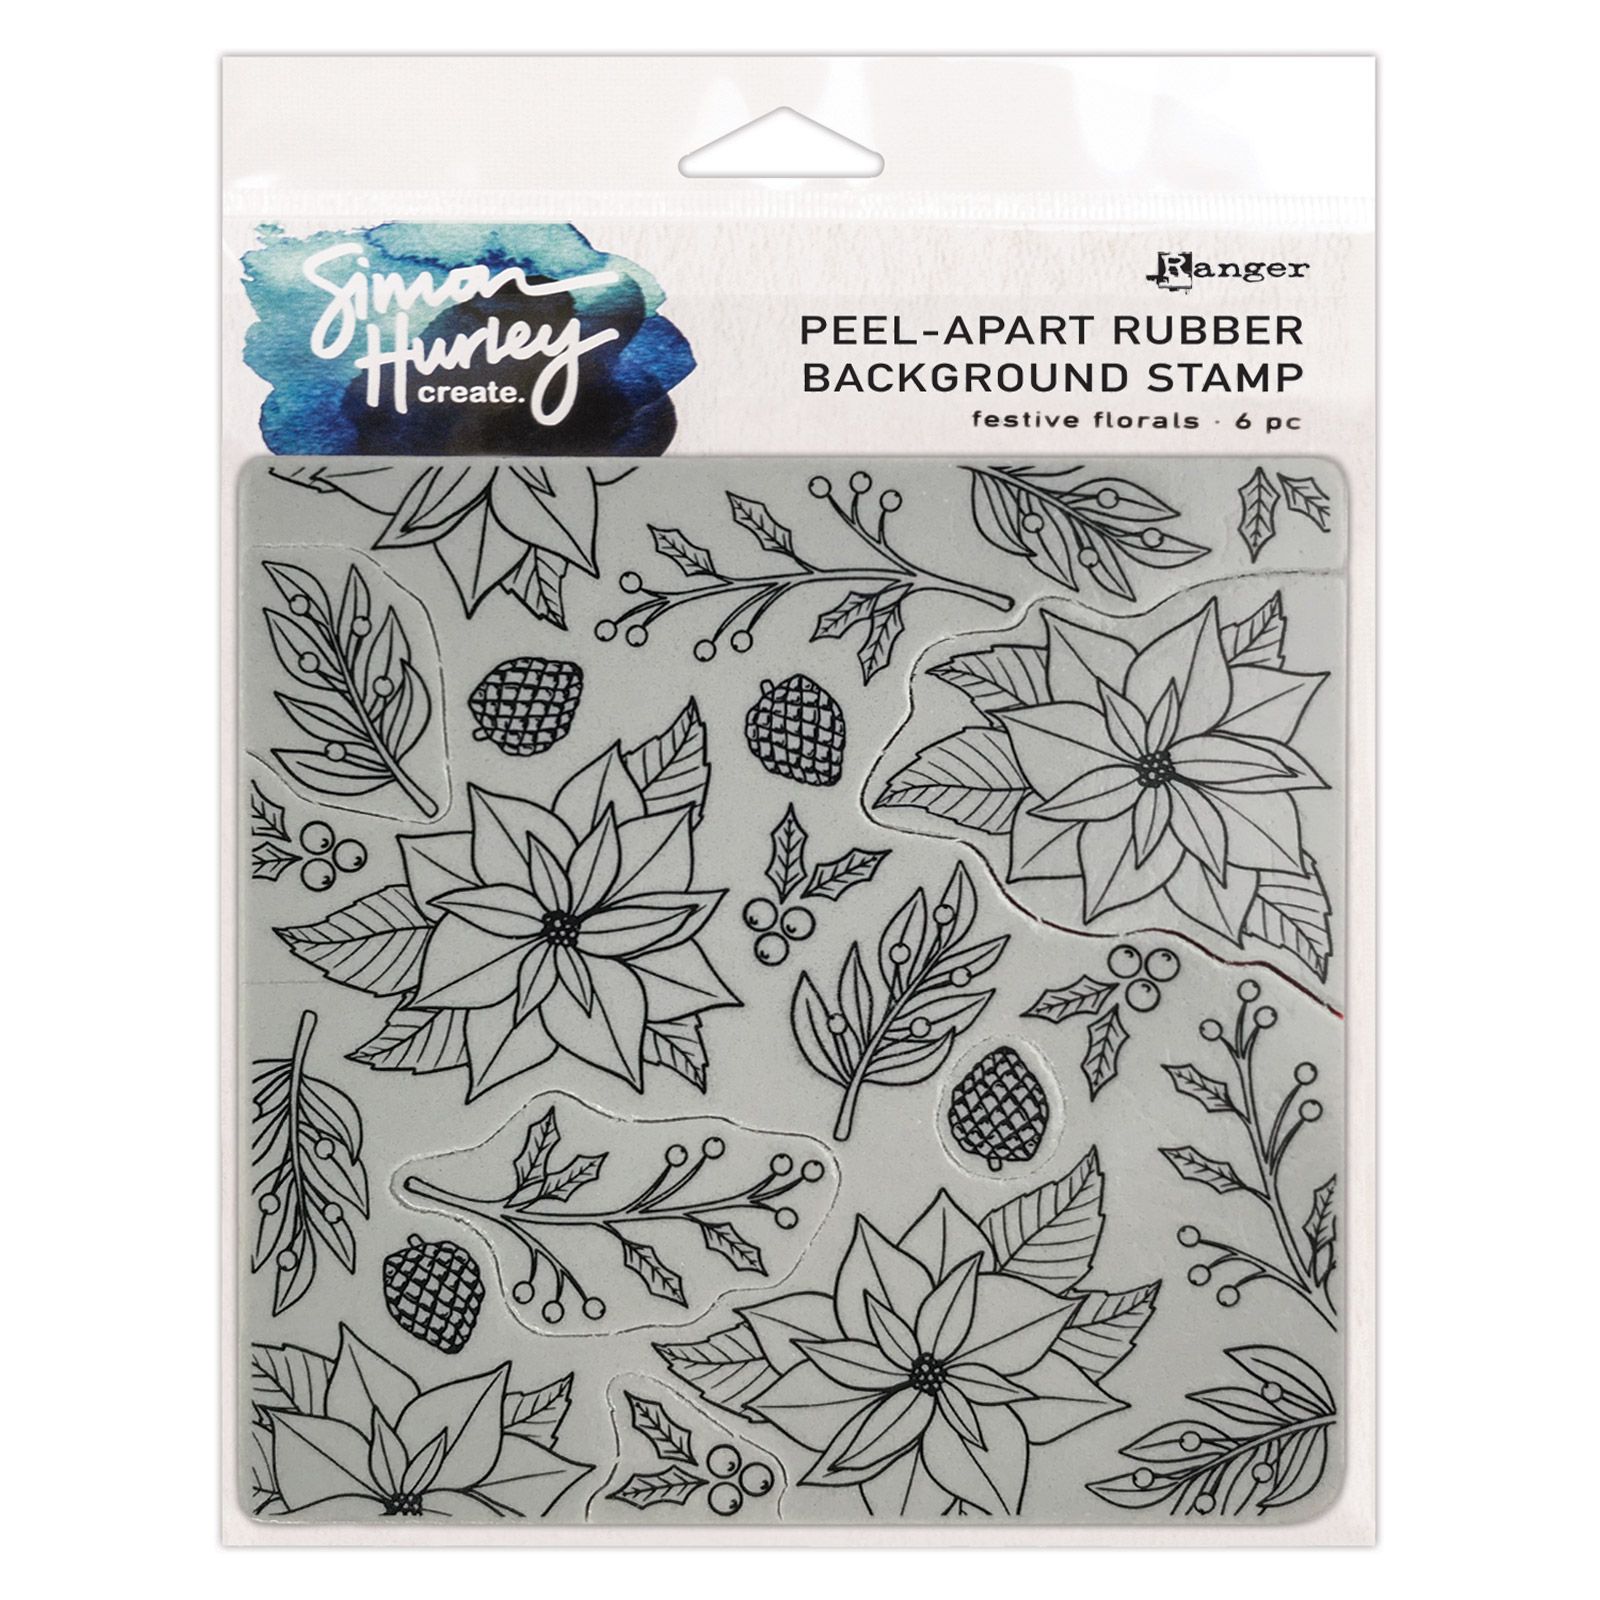 Ranger • Simon Hurley create background stamps Festive florals